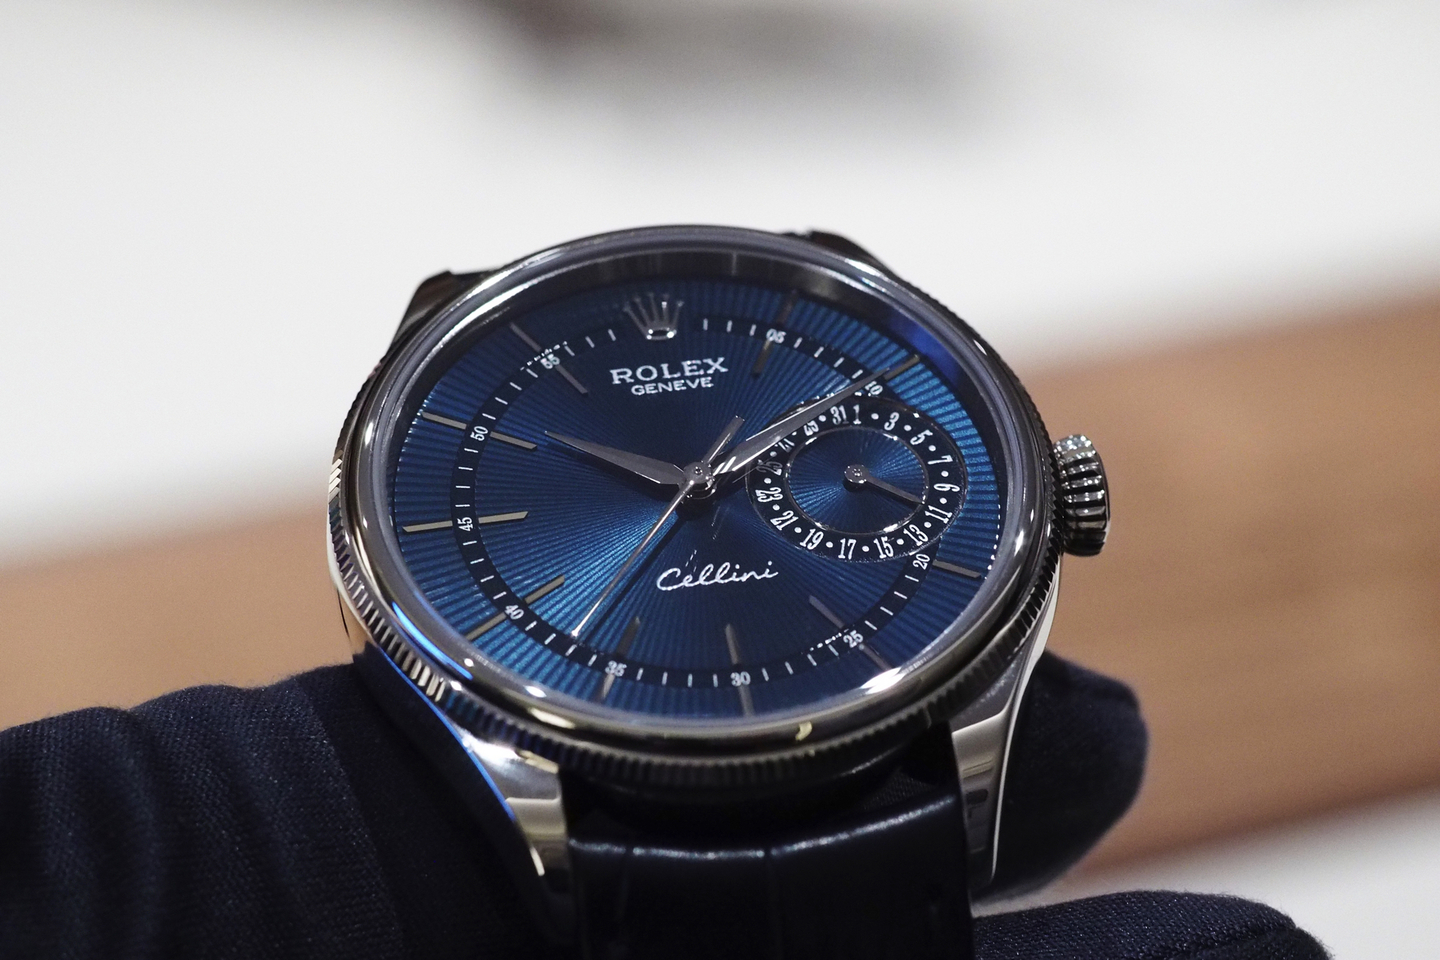 The Rolex Cellini Date Hands-On